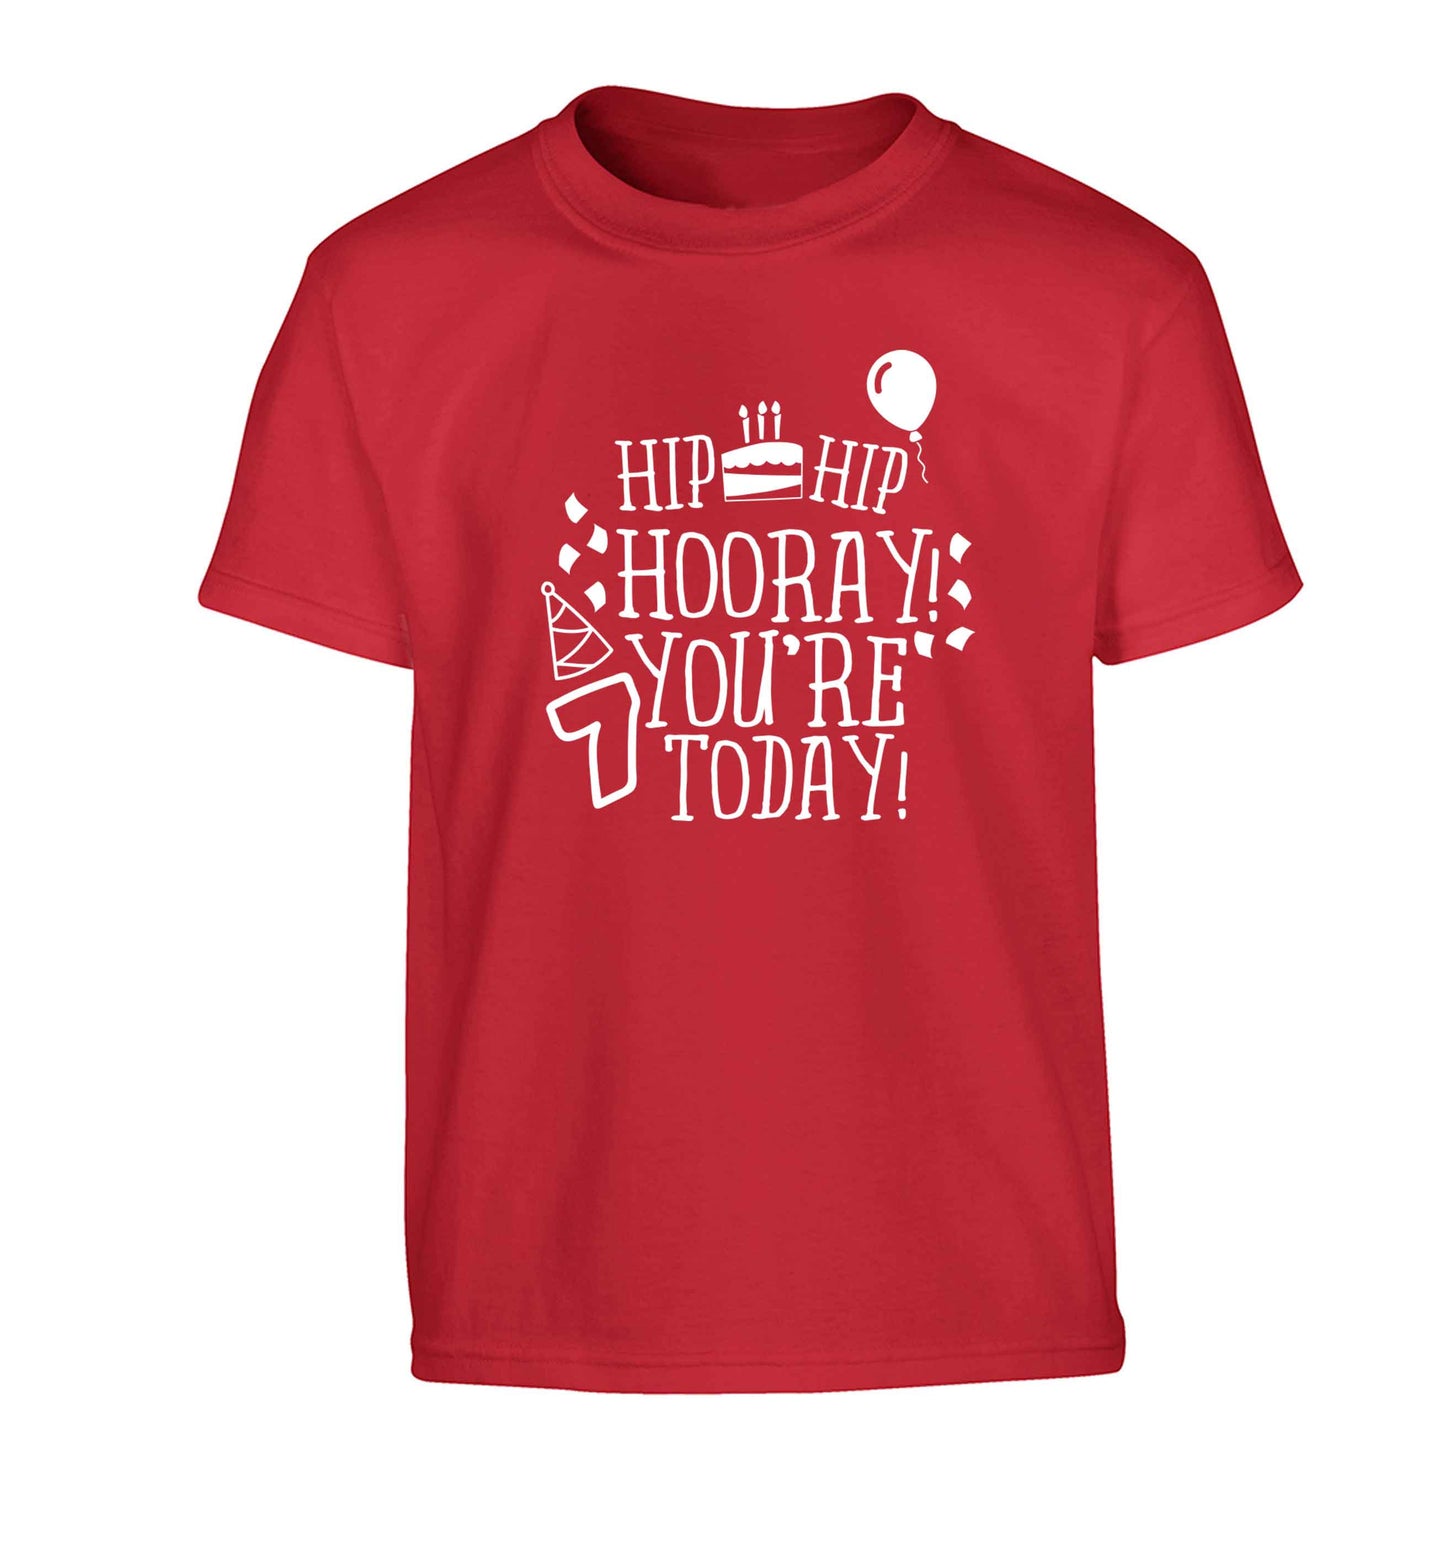 Hip hip hooray you're seven today! Children's red Tshirt 12-13 Years